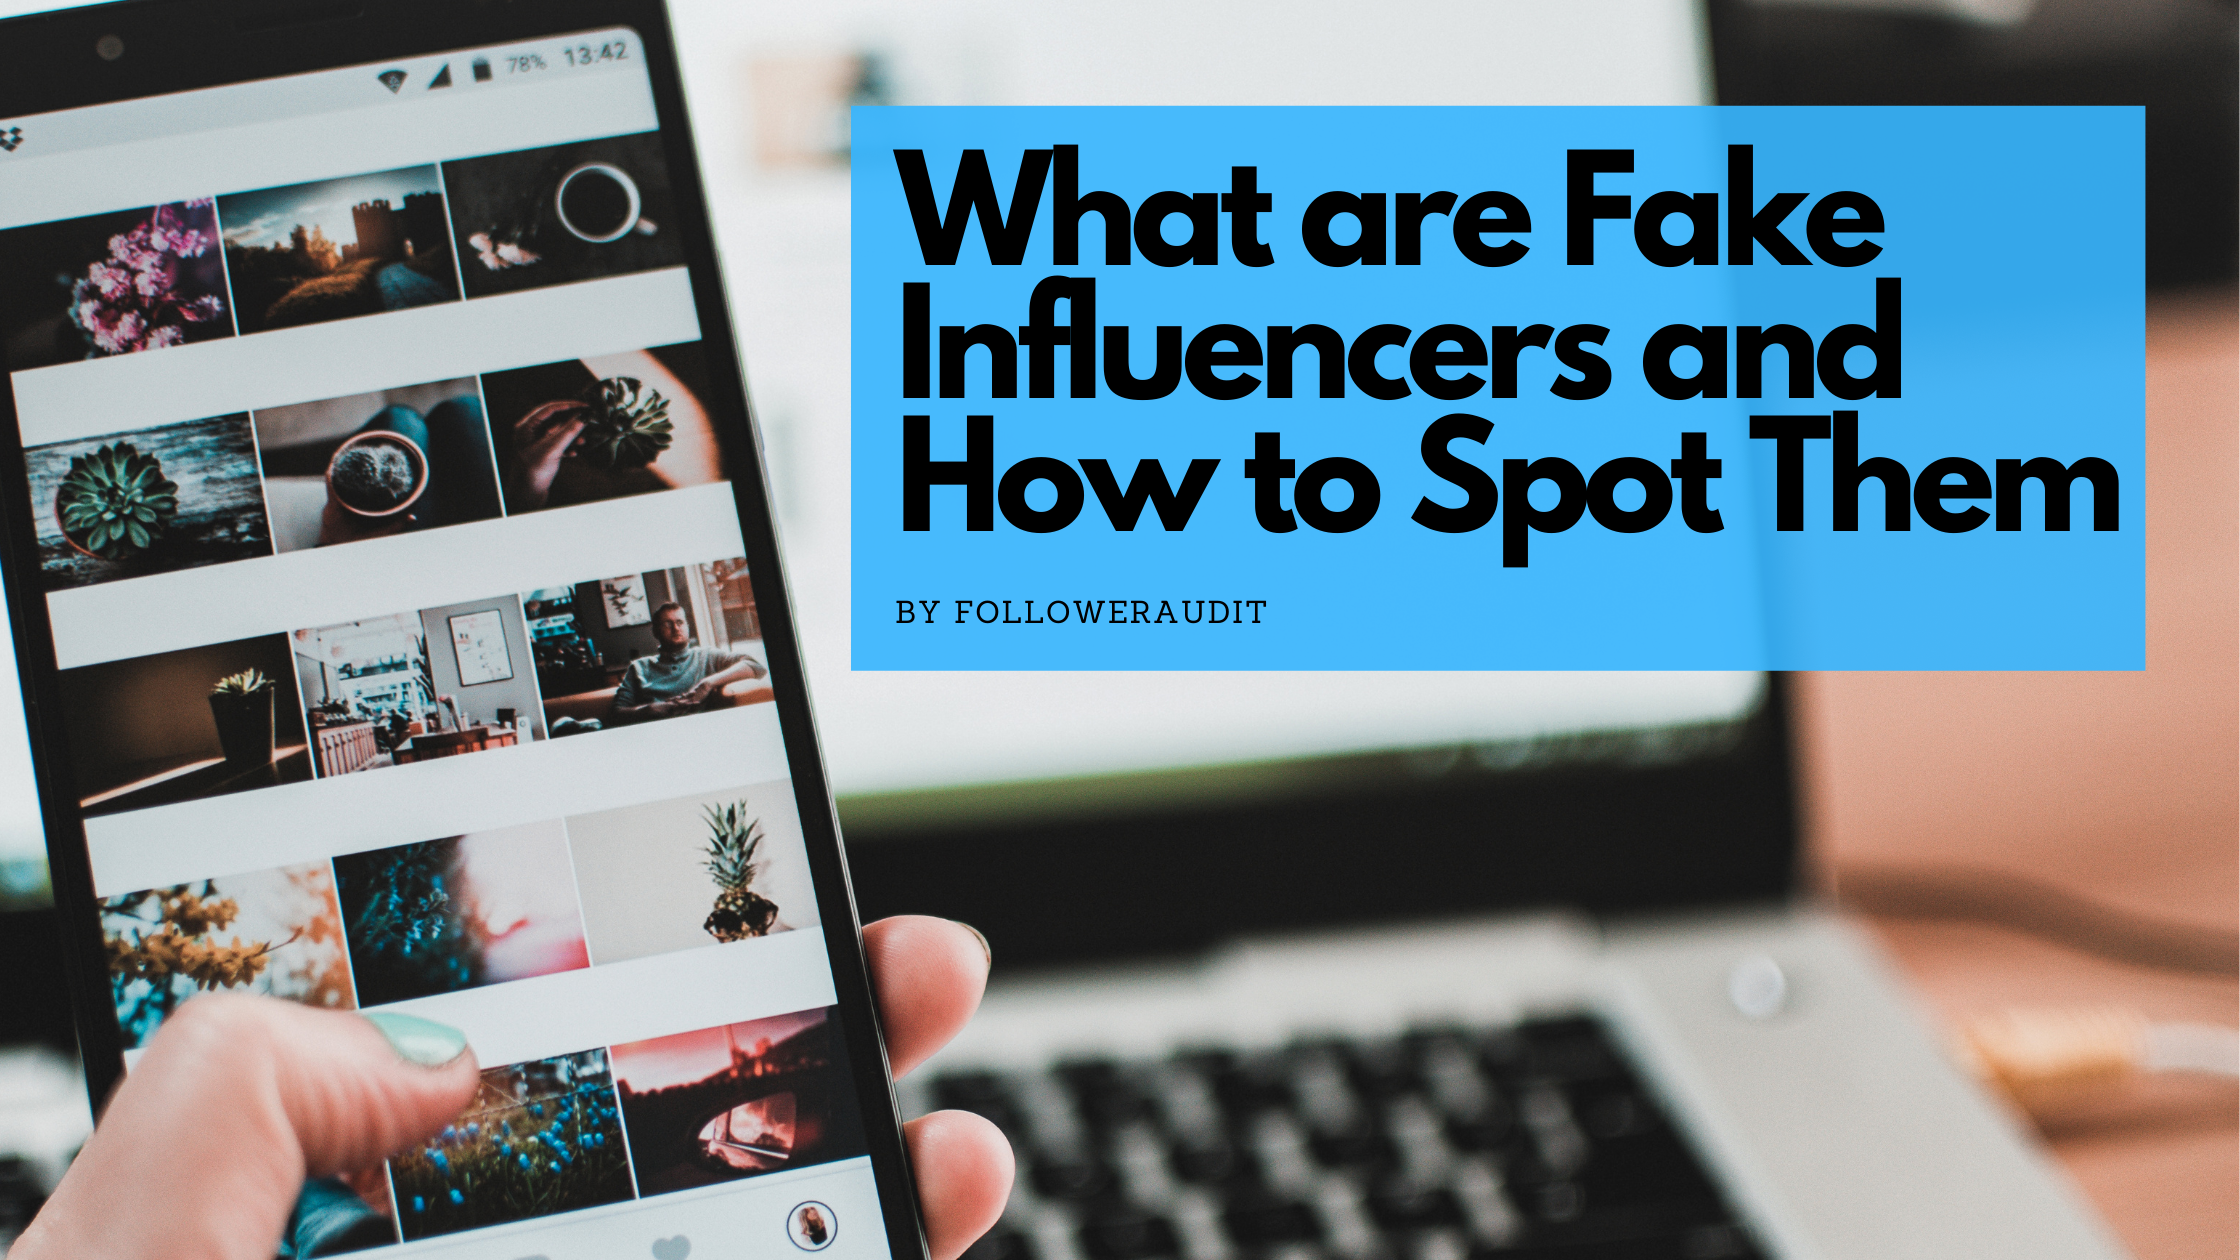 What are Fake Influencers and How to Spot Them